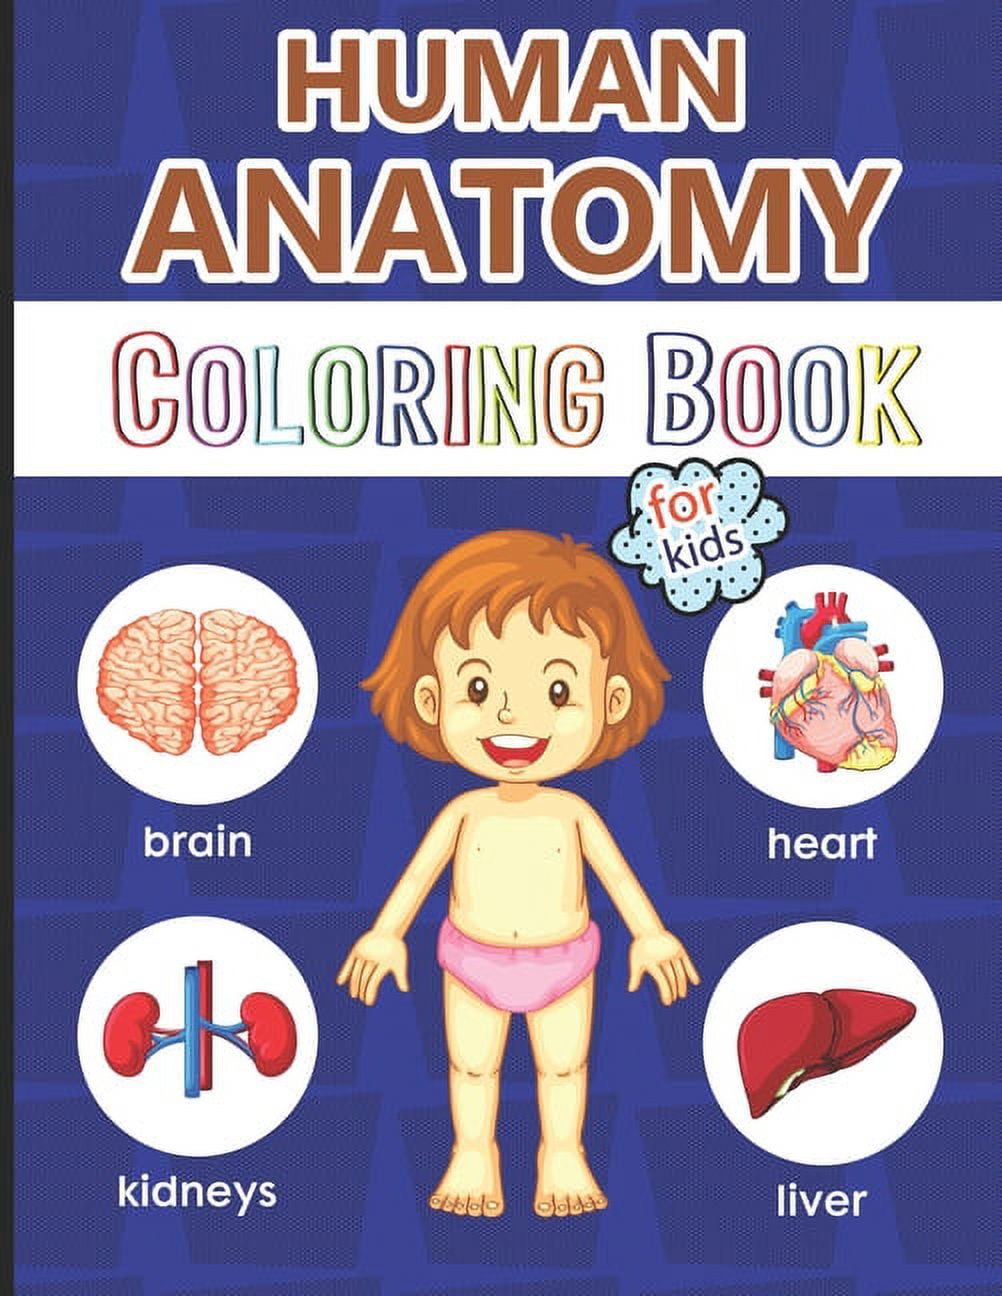 Human Anatomy Coloring Book for Kids: Over 40 Human Body Coloring Pages, Great Gift for Boys & Girls, Ages 4, 5, 6, 7, and 8 Years Old (Coloring Books for Kids Ages 4-8), Kids Anatomy Coloring Book [Book]